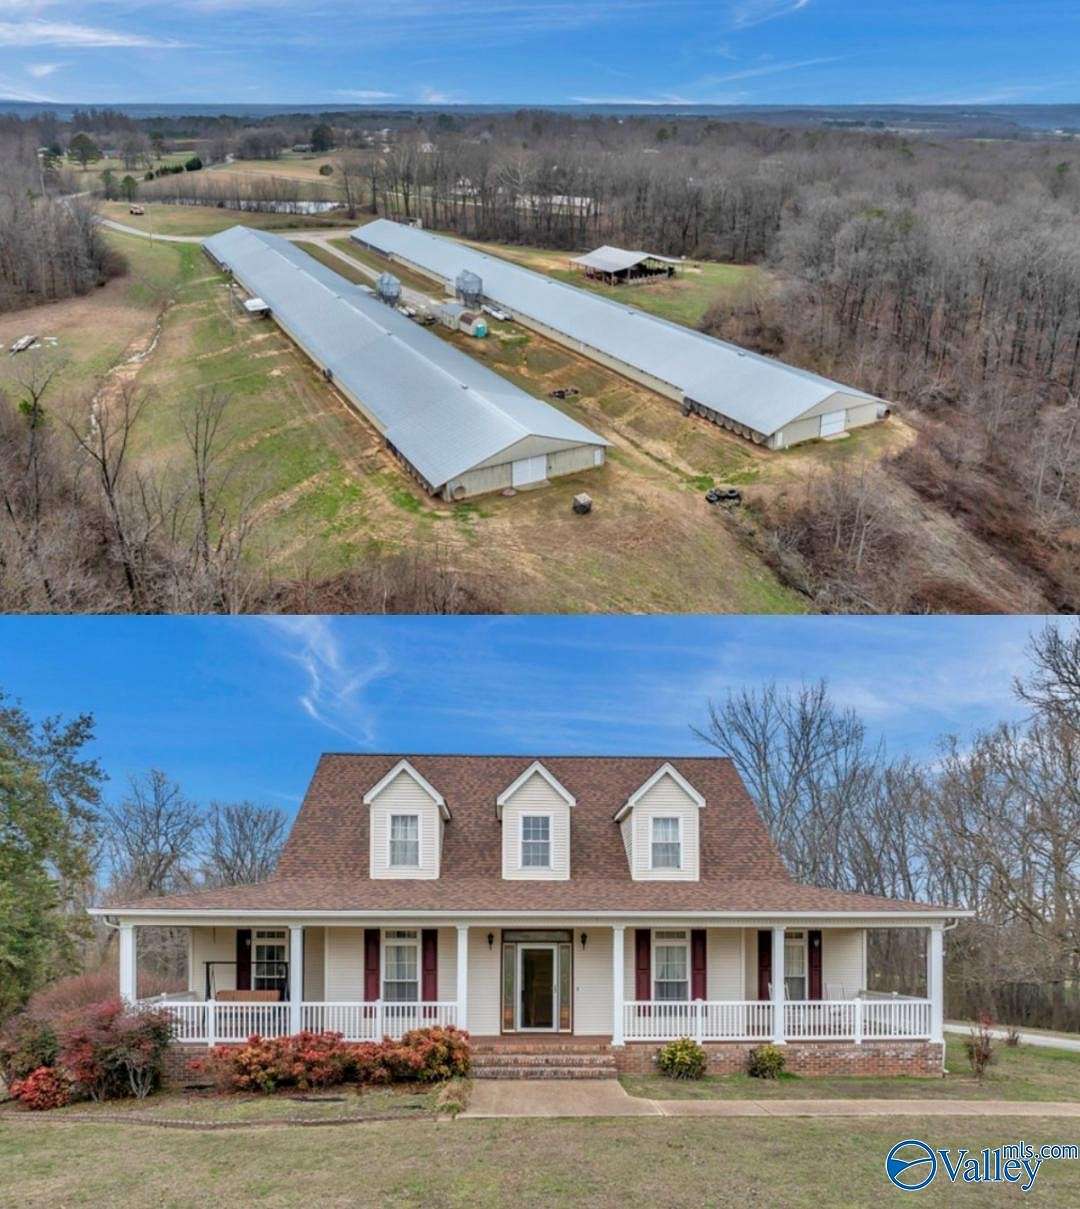 43 Acres of Agricultural Land with Home for Sale in Bryant, Alabama